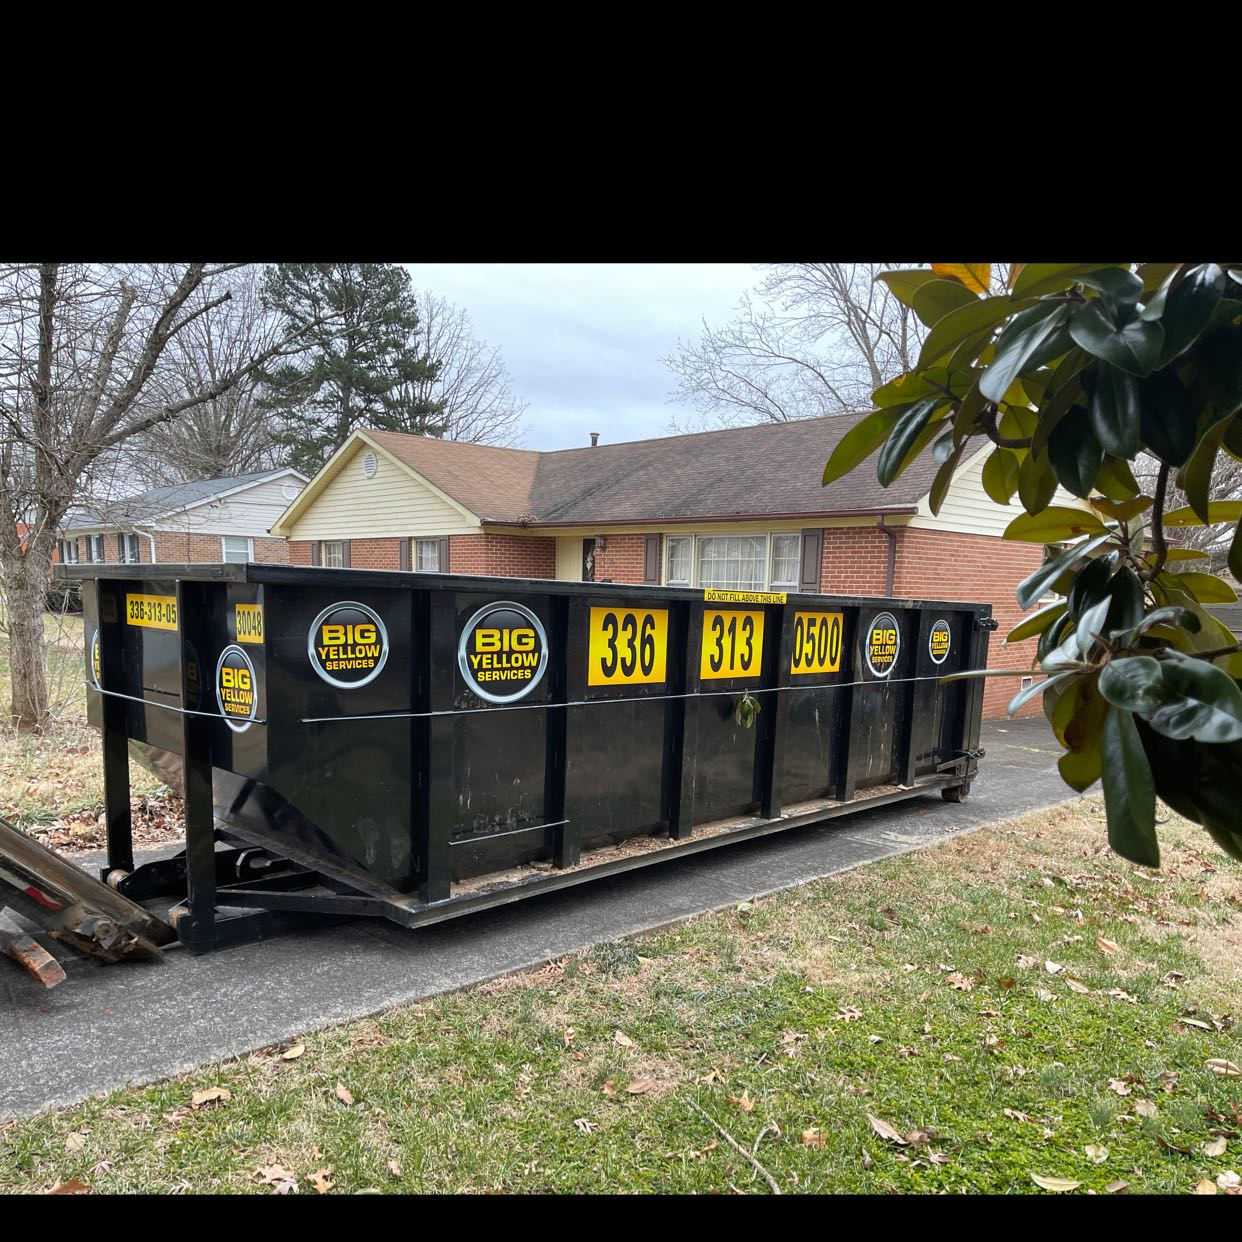 as93vdk13nbsigv7fmob Dumpster Rental Customer Photos in Elon | Roll-Off Dumpster and Portable Toilet Rentals | Big Yellow Services, LLC